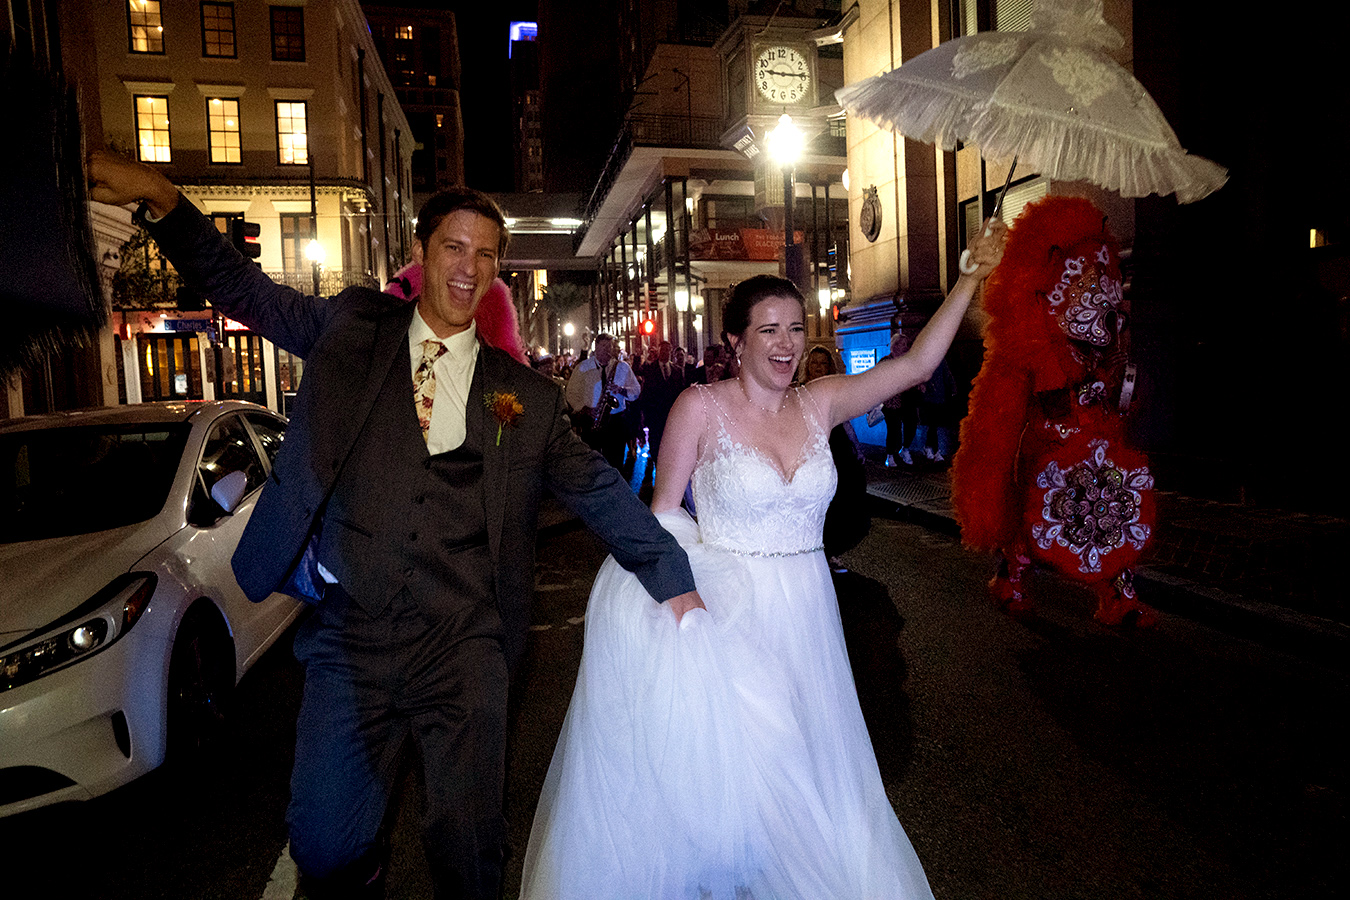 Margaret and Travis Second Line to their wedding reception at the New Orleans Board of Trade.